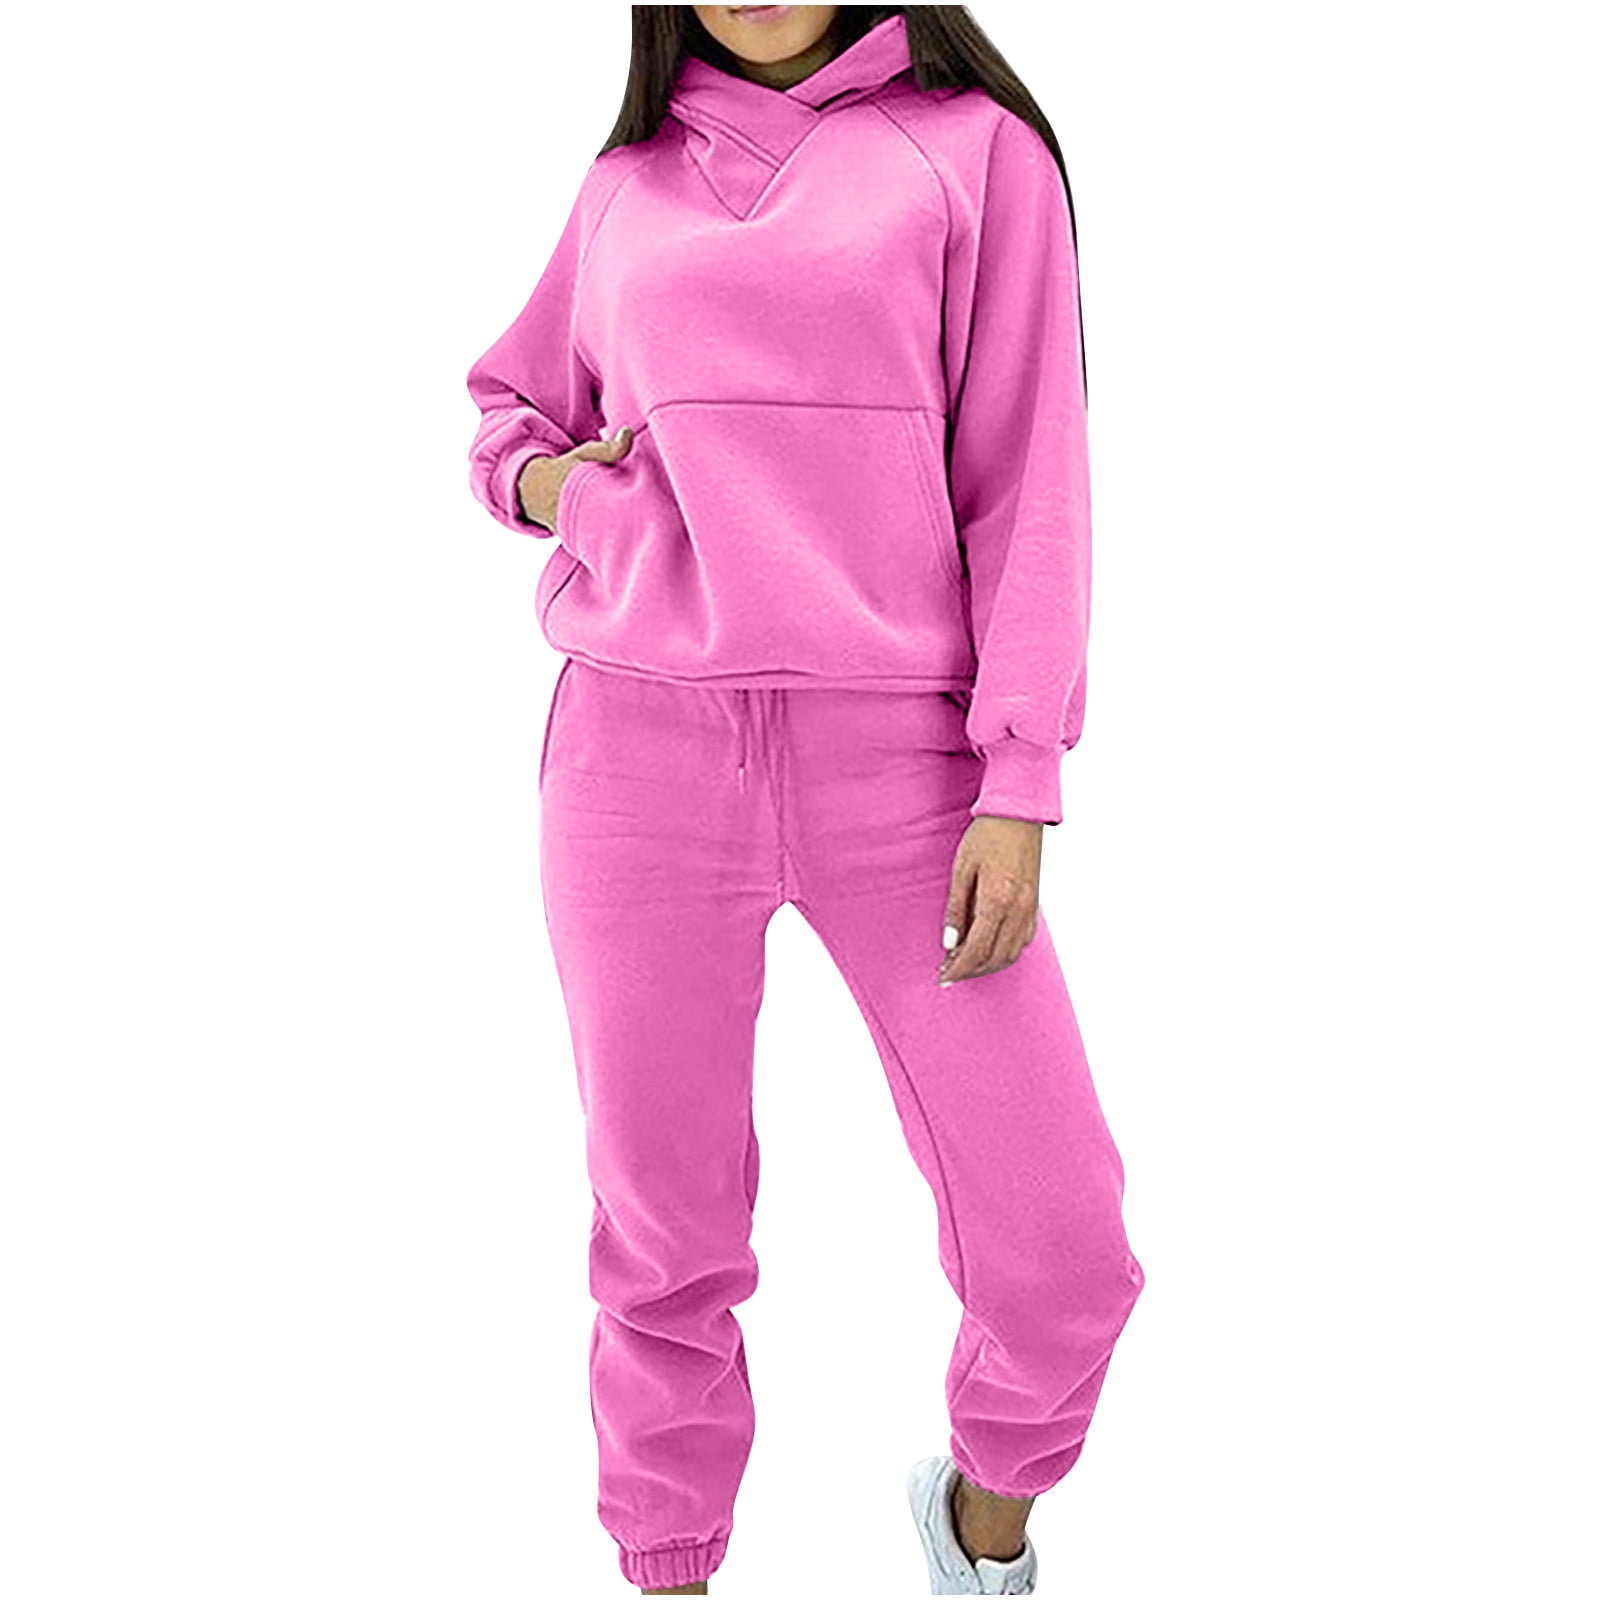 Tracksuit Womens Full Set Sale Clearance,Ladies Hoodies and